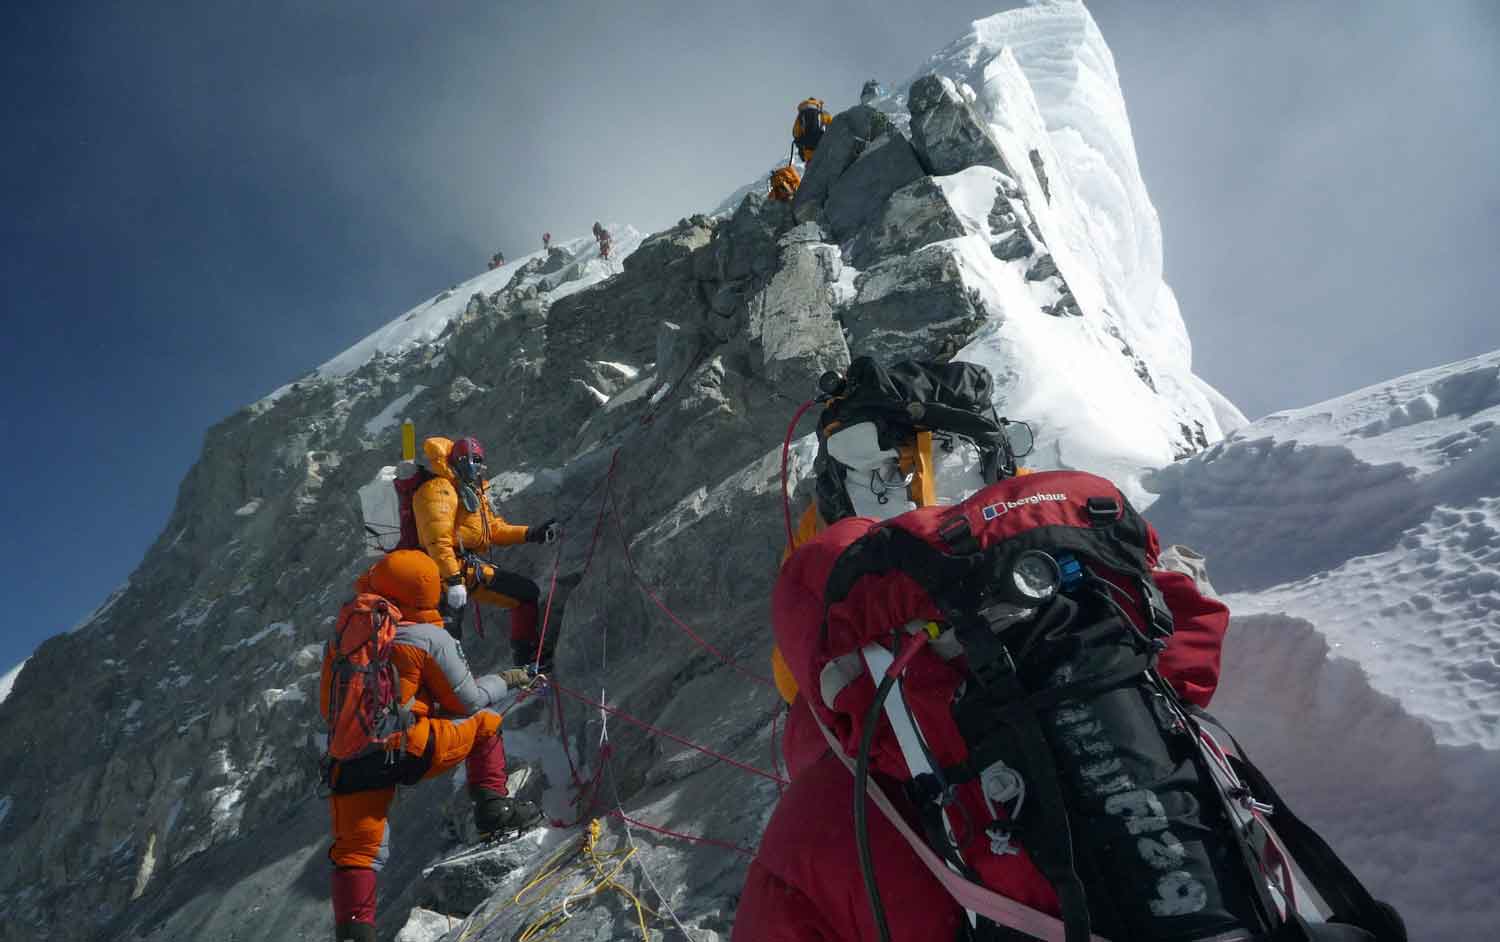 A group of climbers with oxygen tanks and other gear approach the summit of Mount Everest.